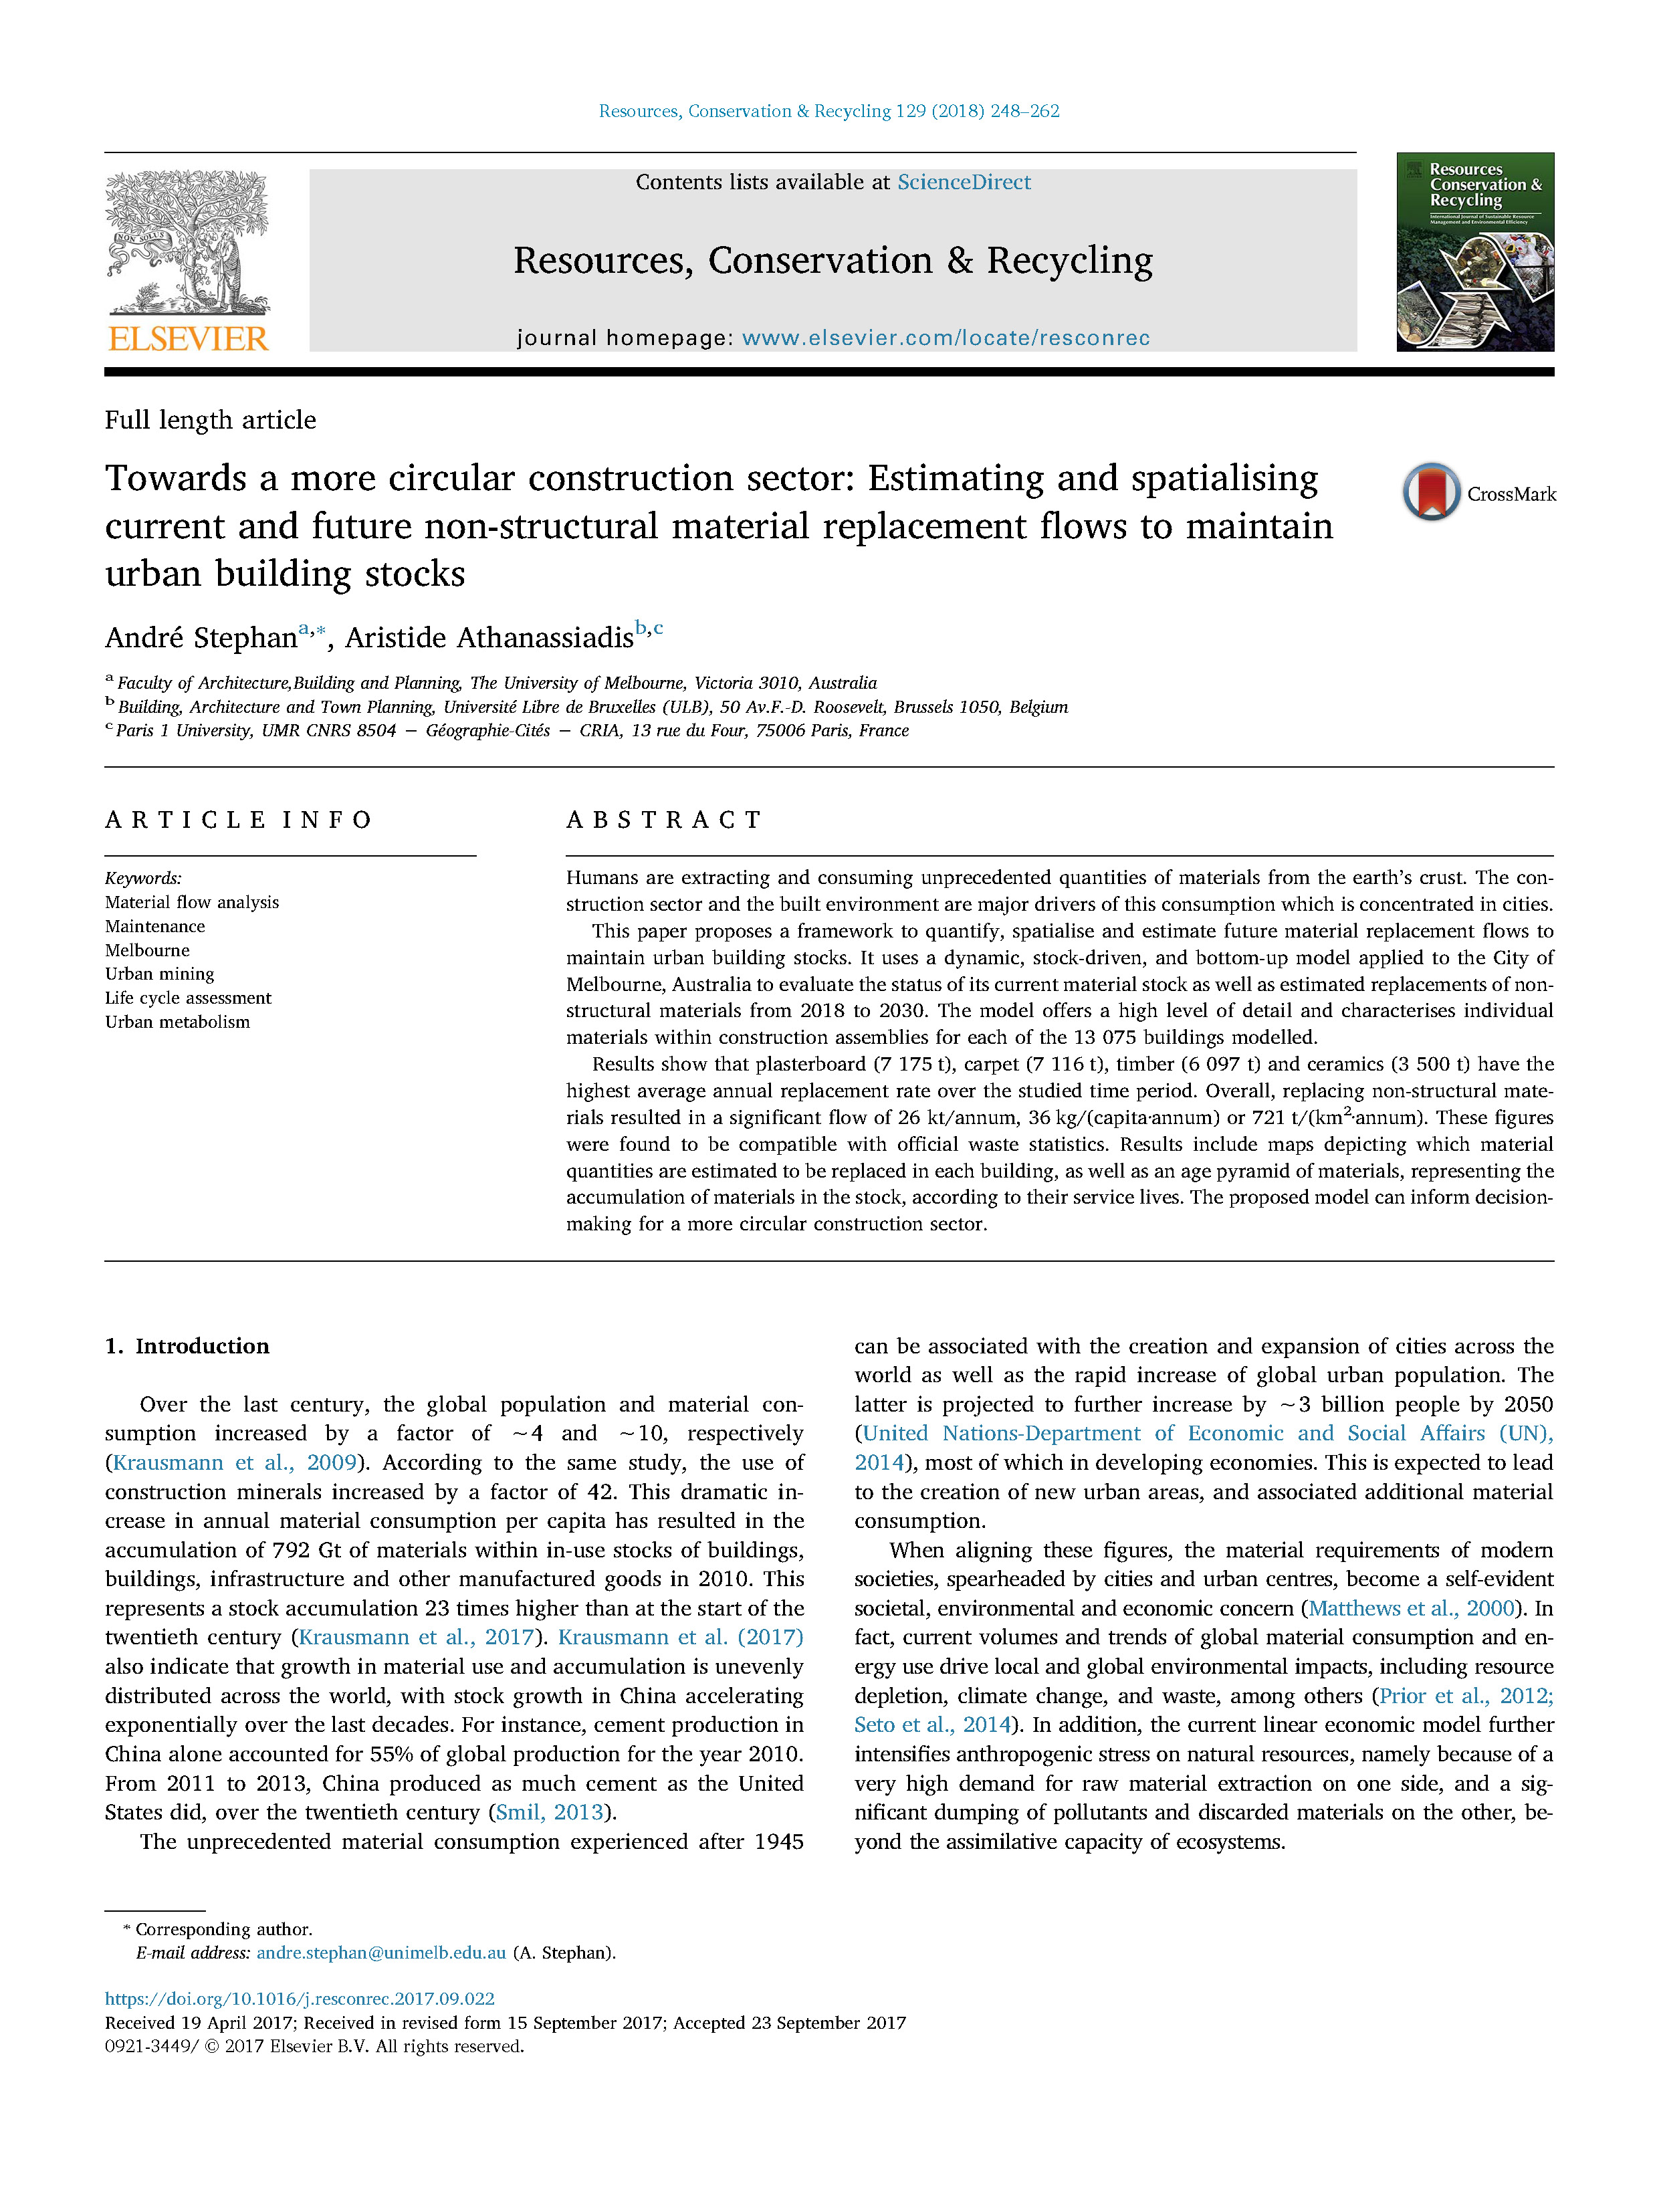 Towards a more circular construction sector: Estimating and spatialising current and future non-structural material replacement flows to maintain urban building stocks